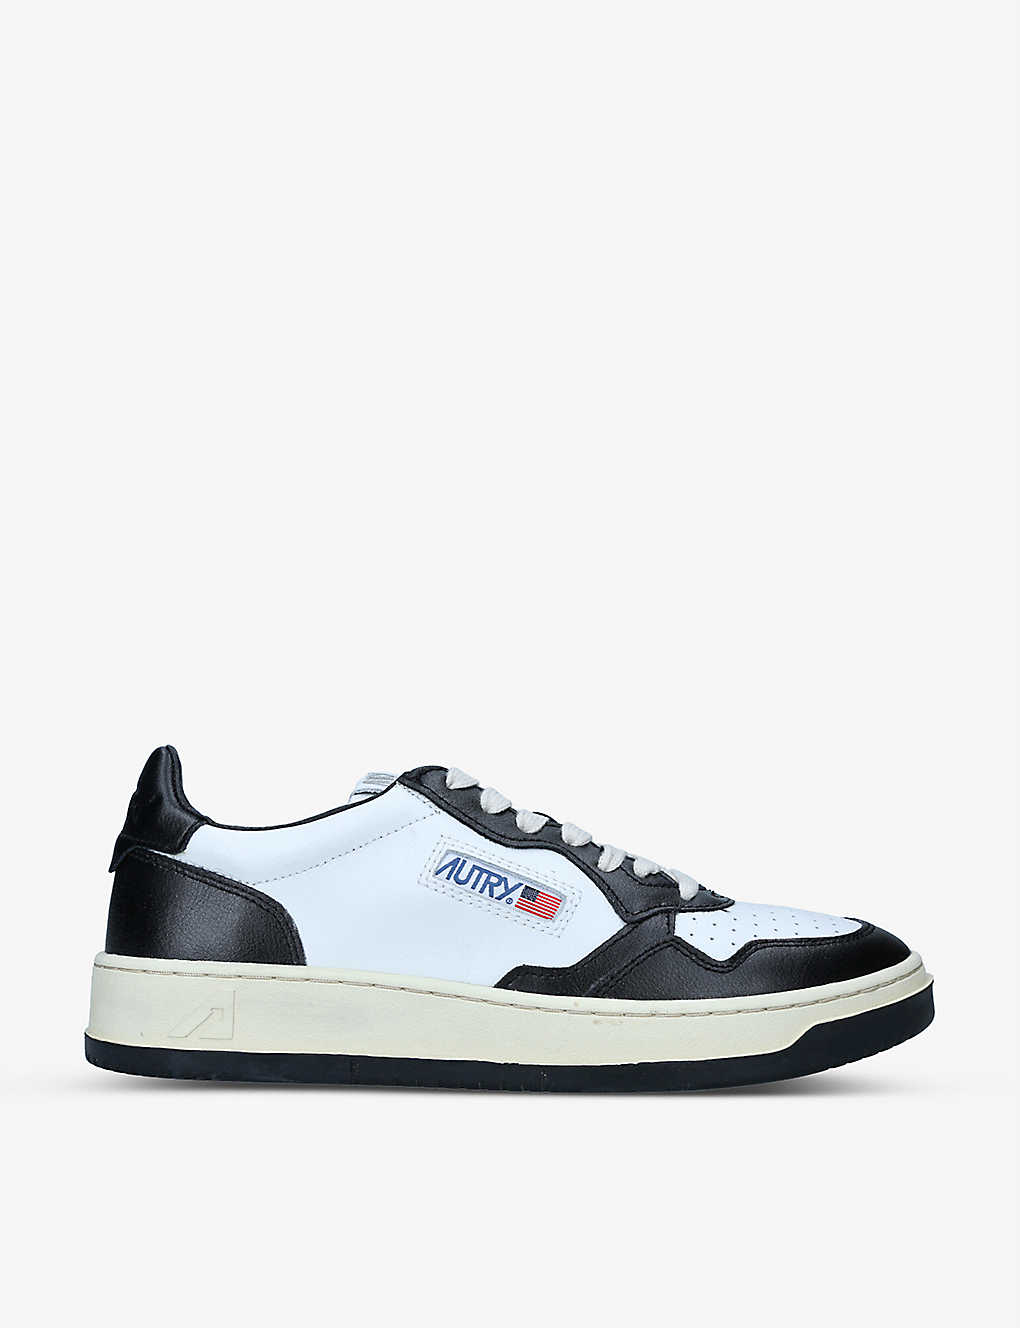 Shop Autry Men's White/blk Medalist Two-tone Leather Low-top Trainers